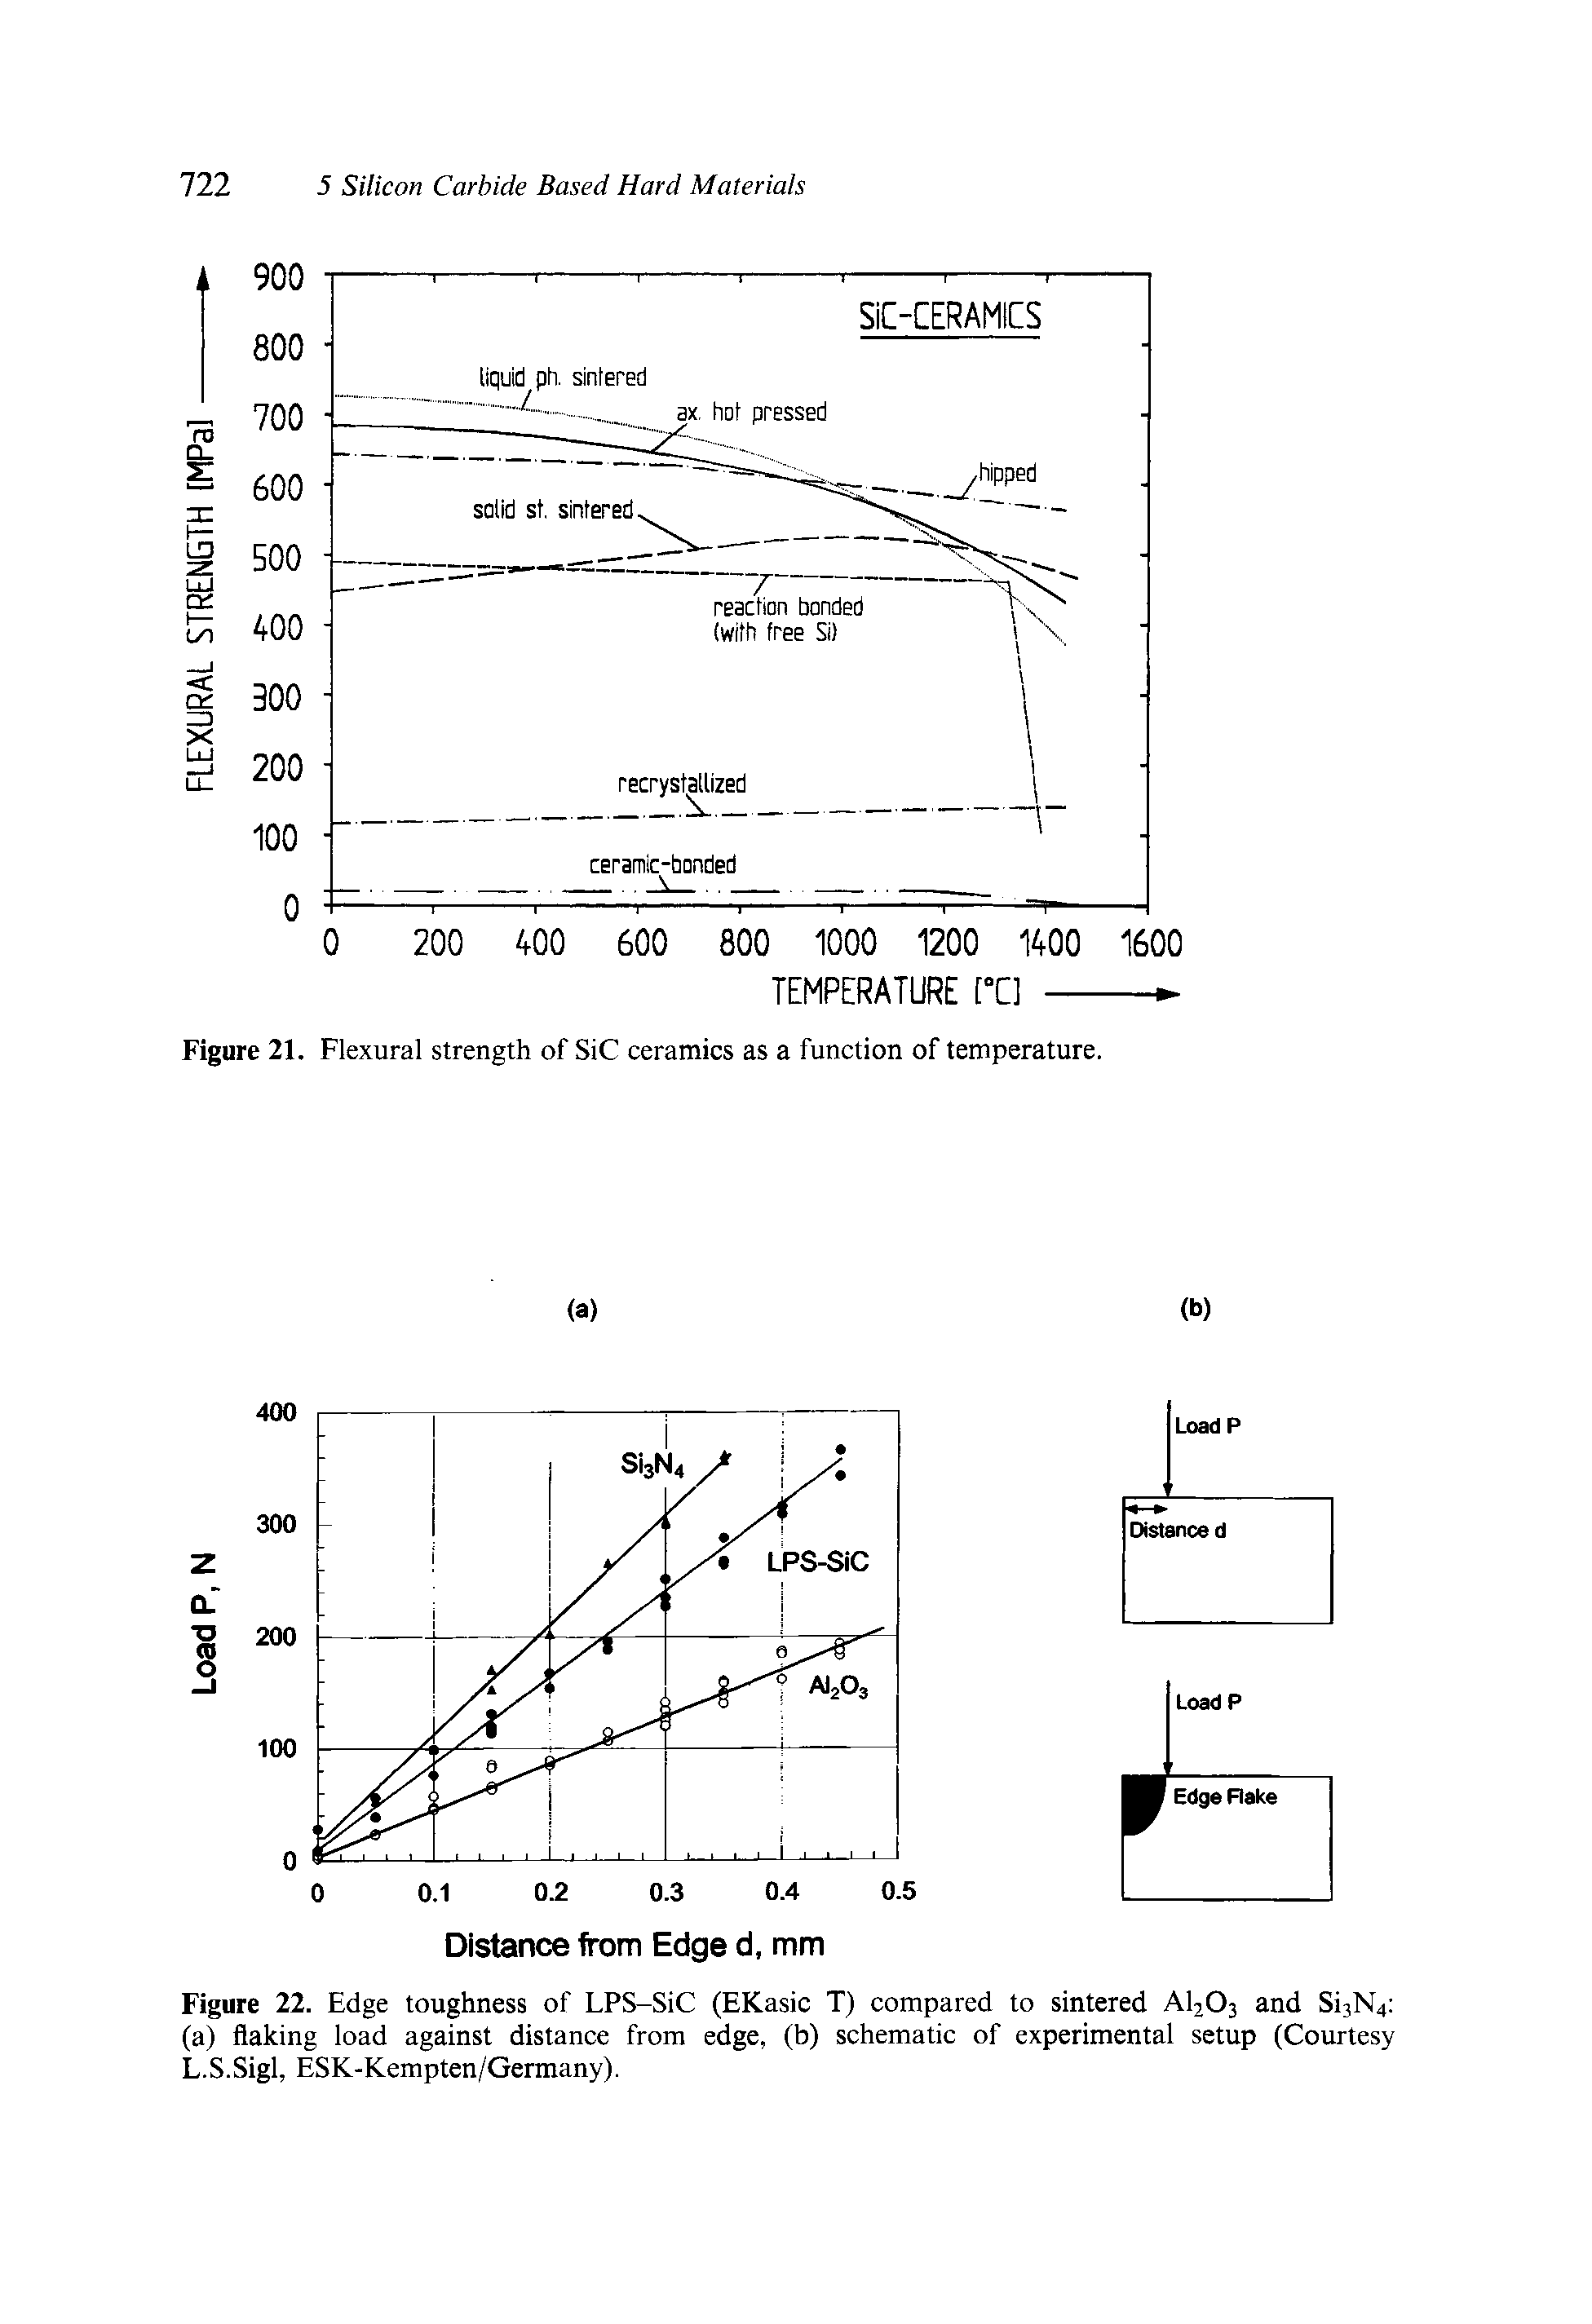 Figure 22. Edge toughness of LPS-SiC (EKasic T) compared to sintered AI2O3 and Si3N4 (a) flaking load against distance from edge, (b) schematic of experimental setup (Courtesy L.S.Sigl, ESK-Kempten/Germany).